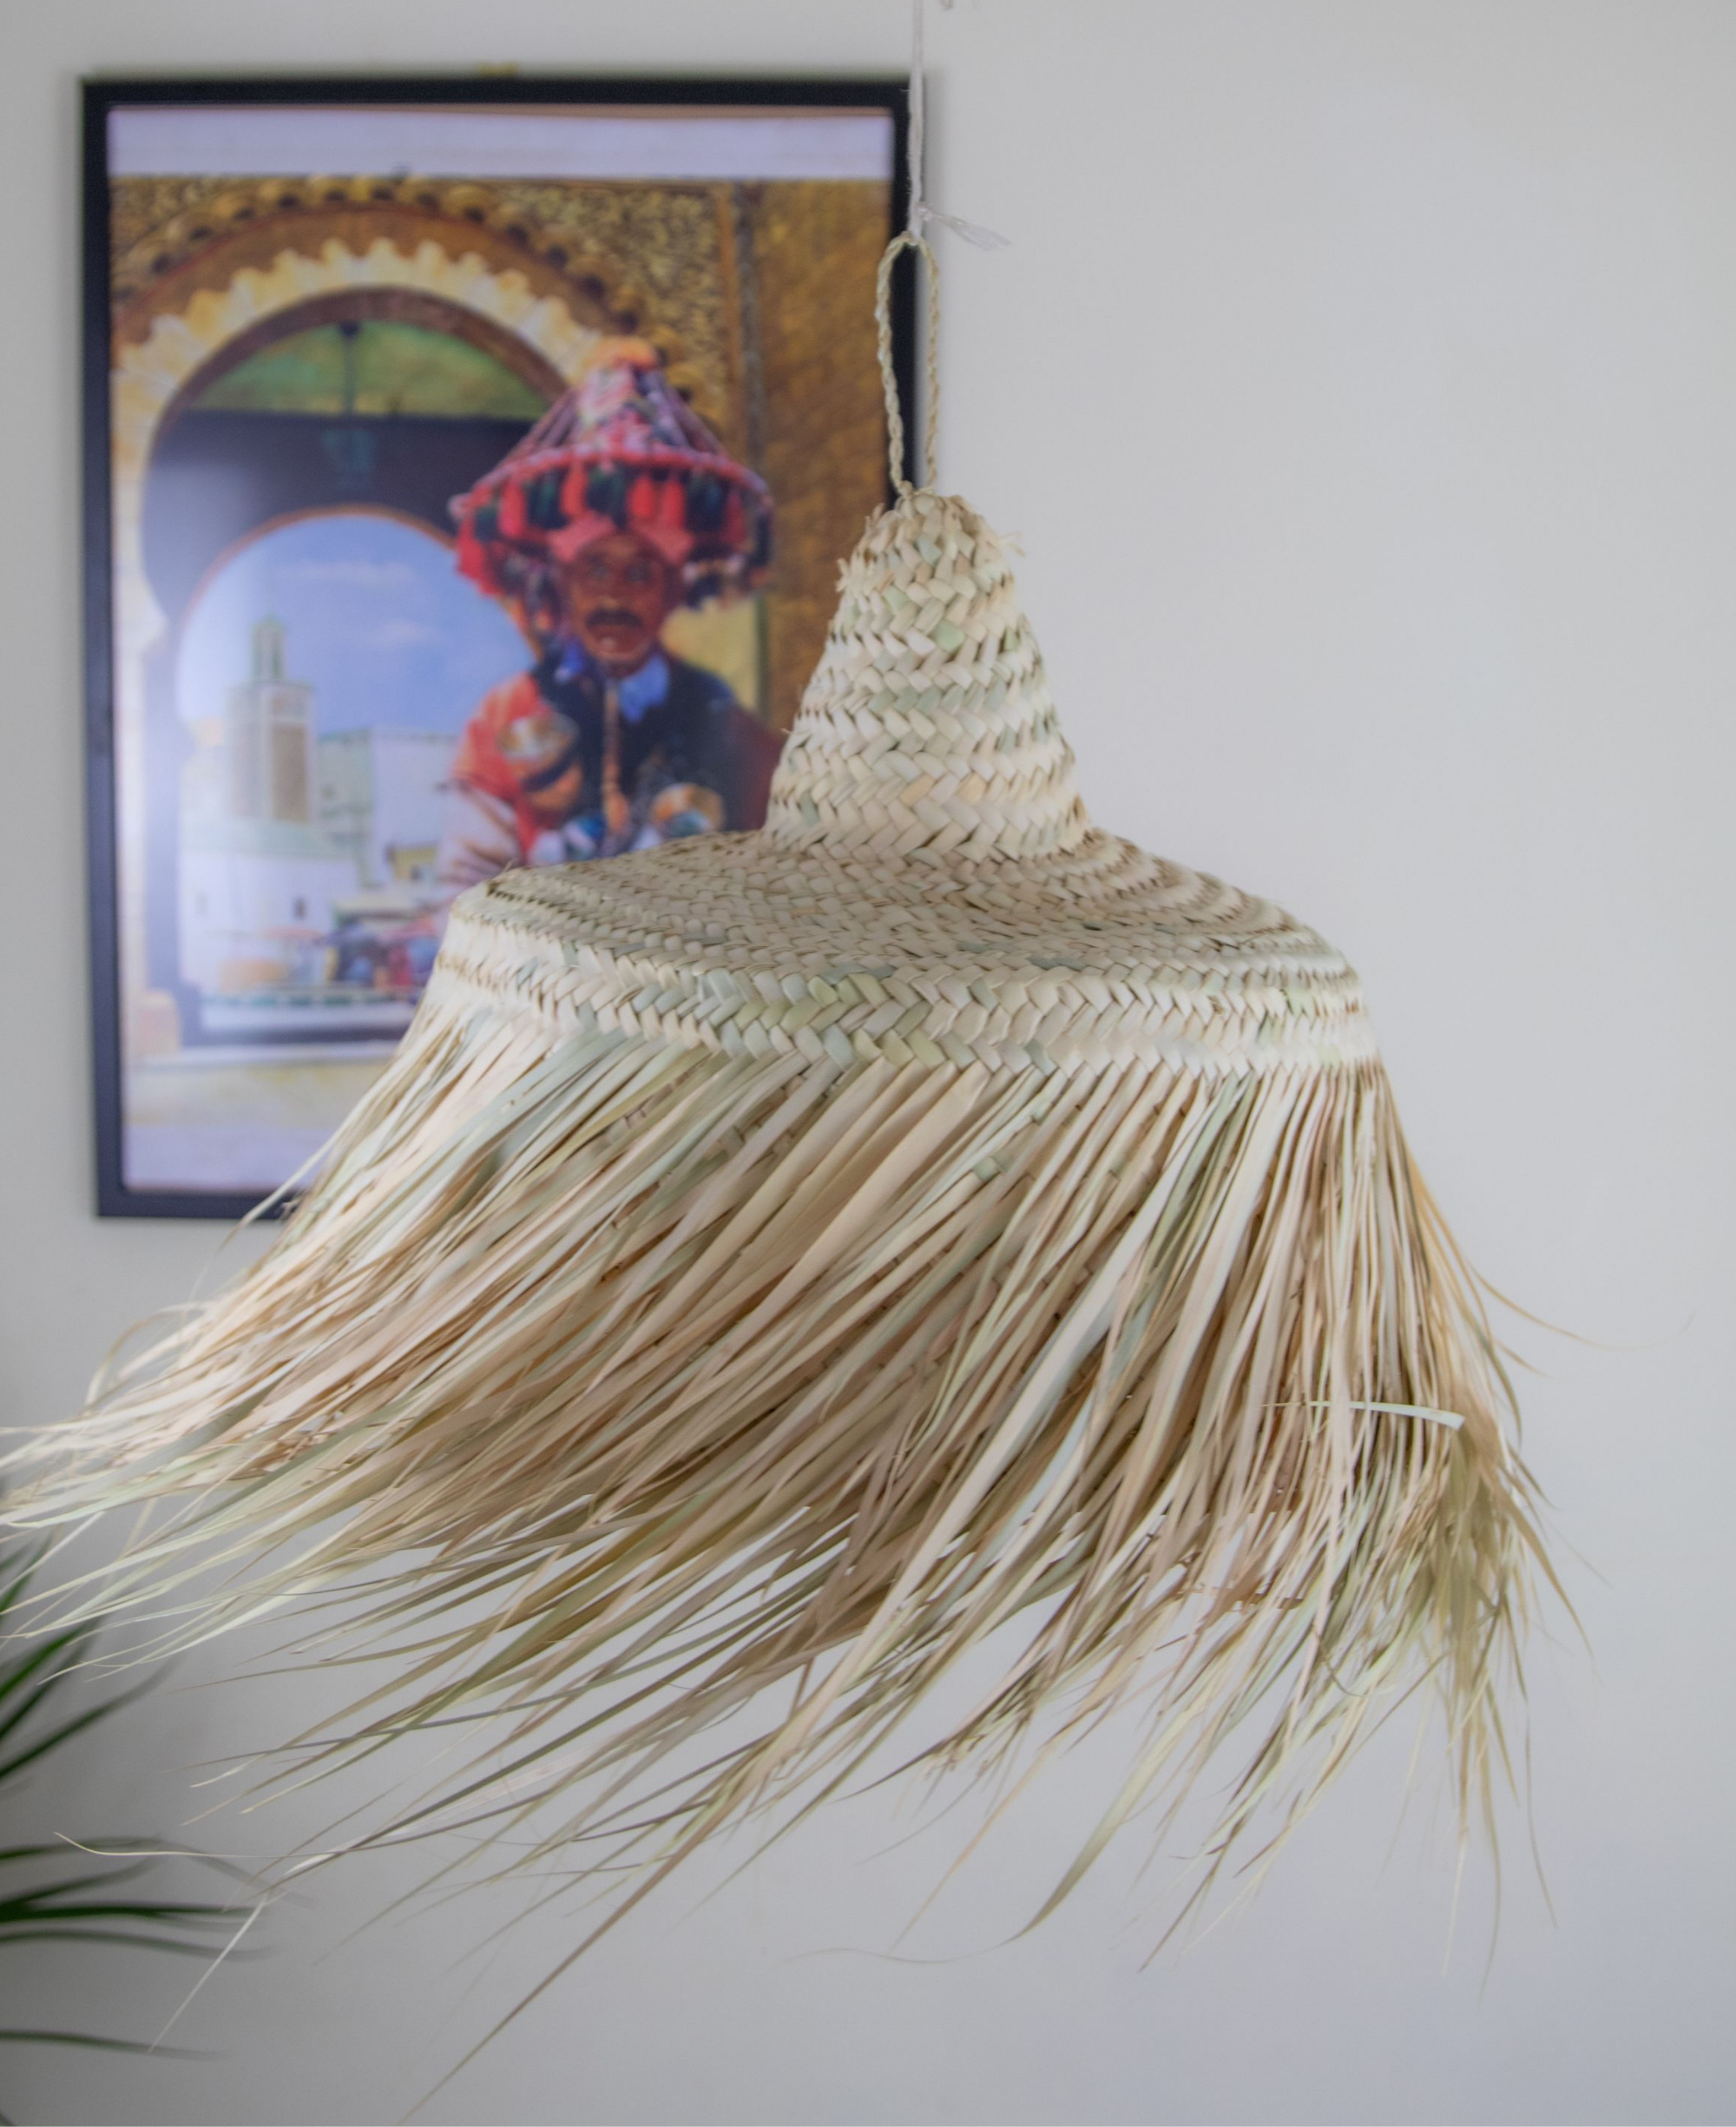 Moroccan Pendant Light with Natural Fiber Fringes - Stylish Suspension Hat Lampshade